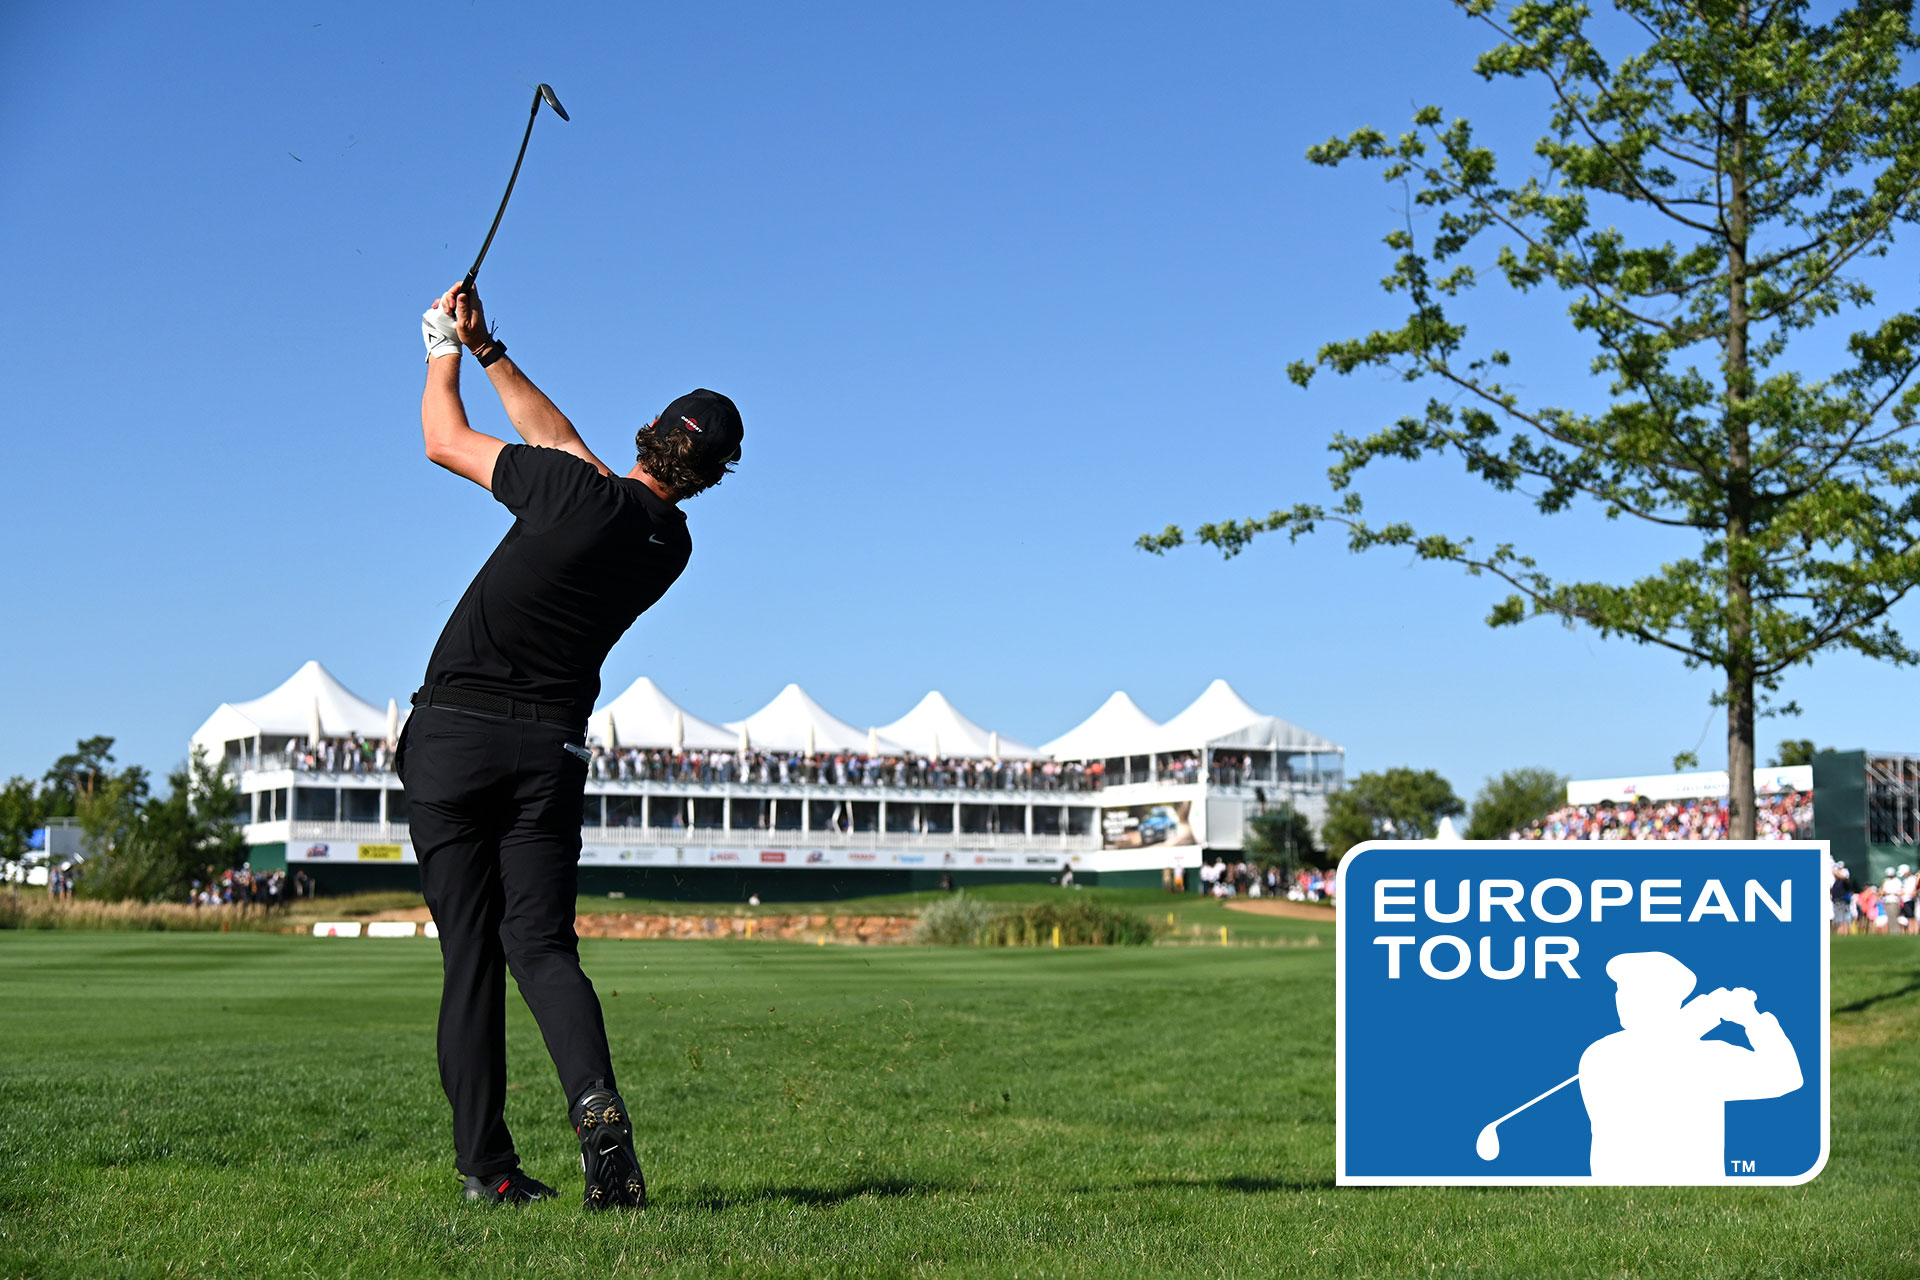 European Tour: Rhys Enoch is at 1 at the 57º OPEN DE PORTUGAL @ MORGADO GOLF RESORT after the second round